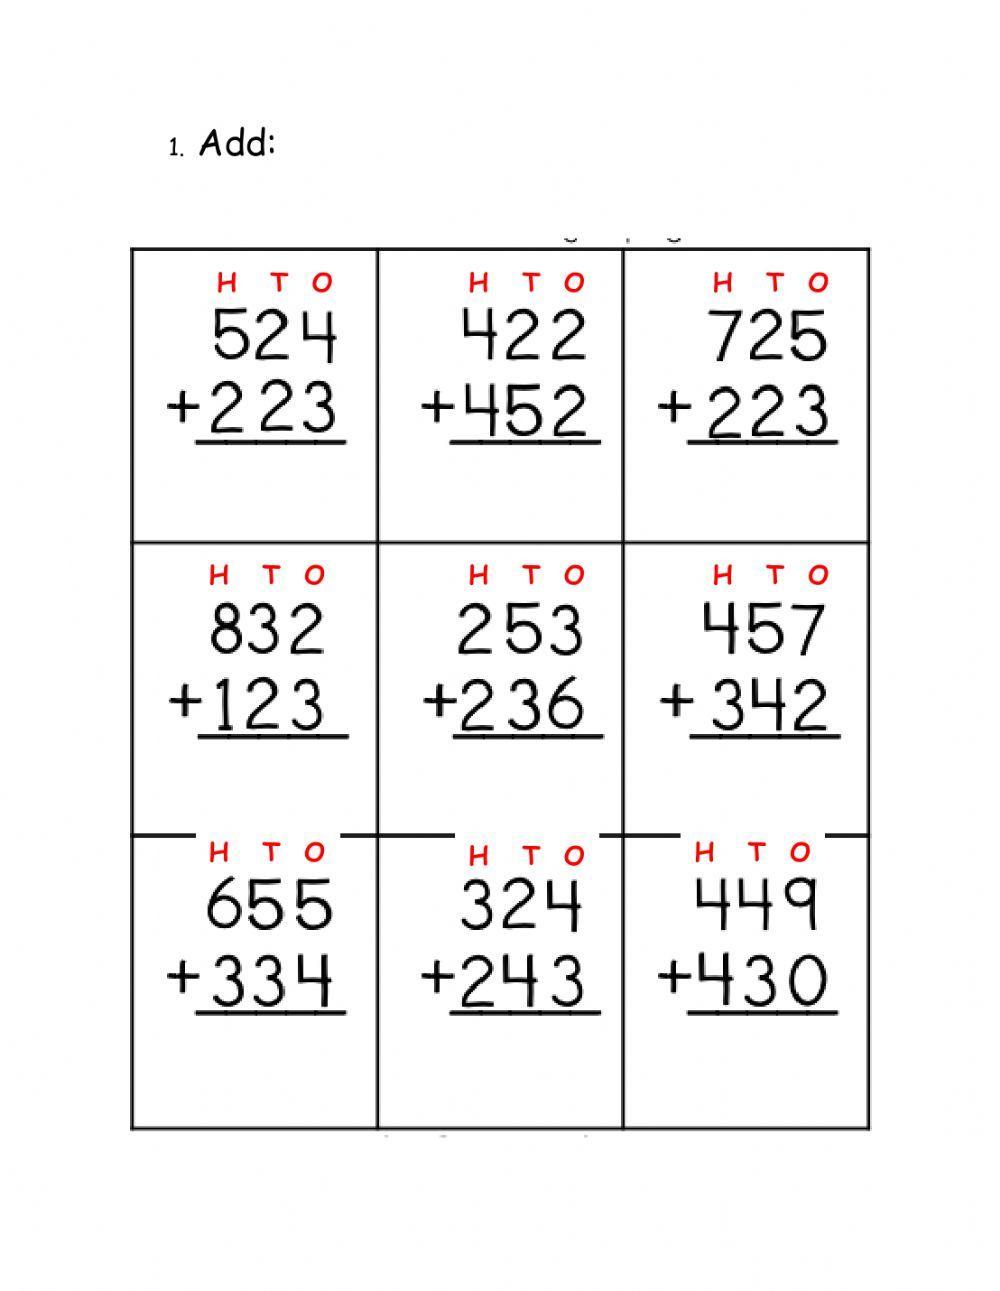 Addition without regrouping with 3 digits.